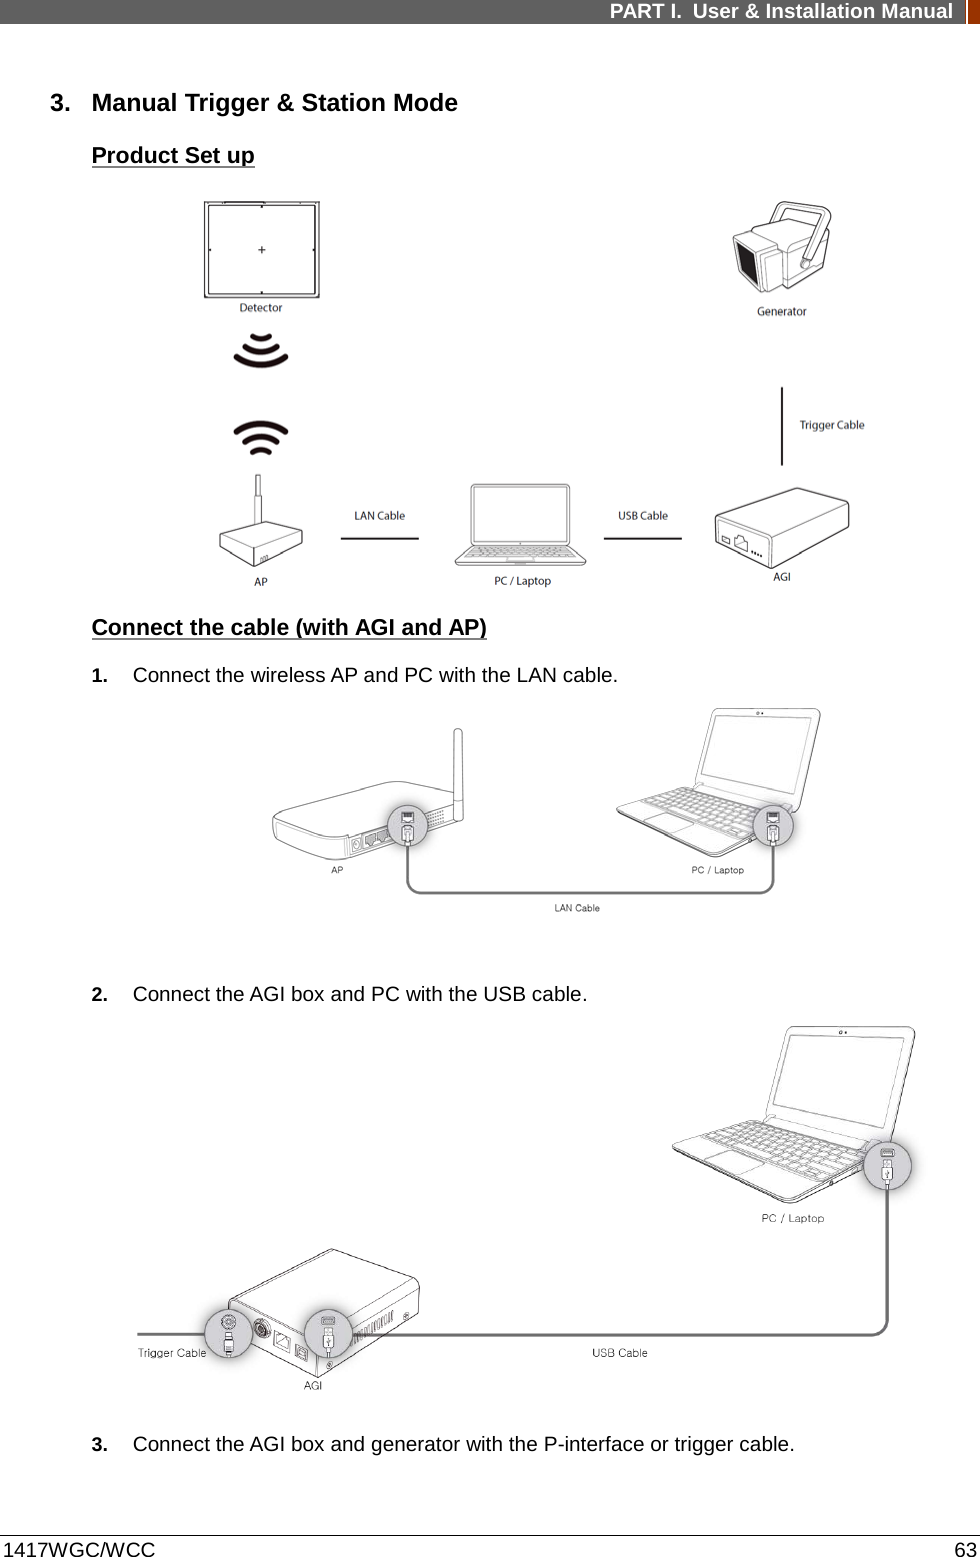 PART I. User &amp; Installation Manual  1417WGC/WCC 63 3. Manual Trigger &amp; Station Mode Product Set up  Connect the cable (with AGI and AP) 1. Connect the wireless AP and PC with the LAN cable.   2. Connect the AGI box and PC with the USB cable.  3. Connect the AGI box and generator with the P-interface or trigger cable. 